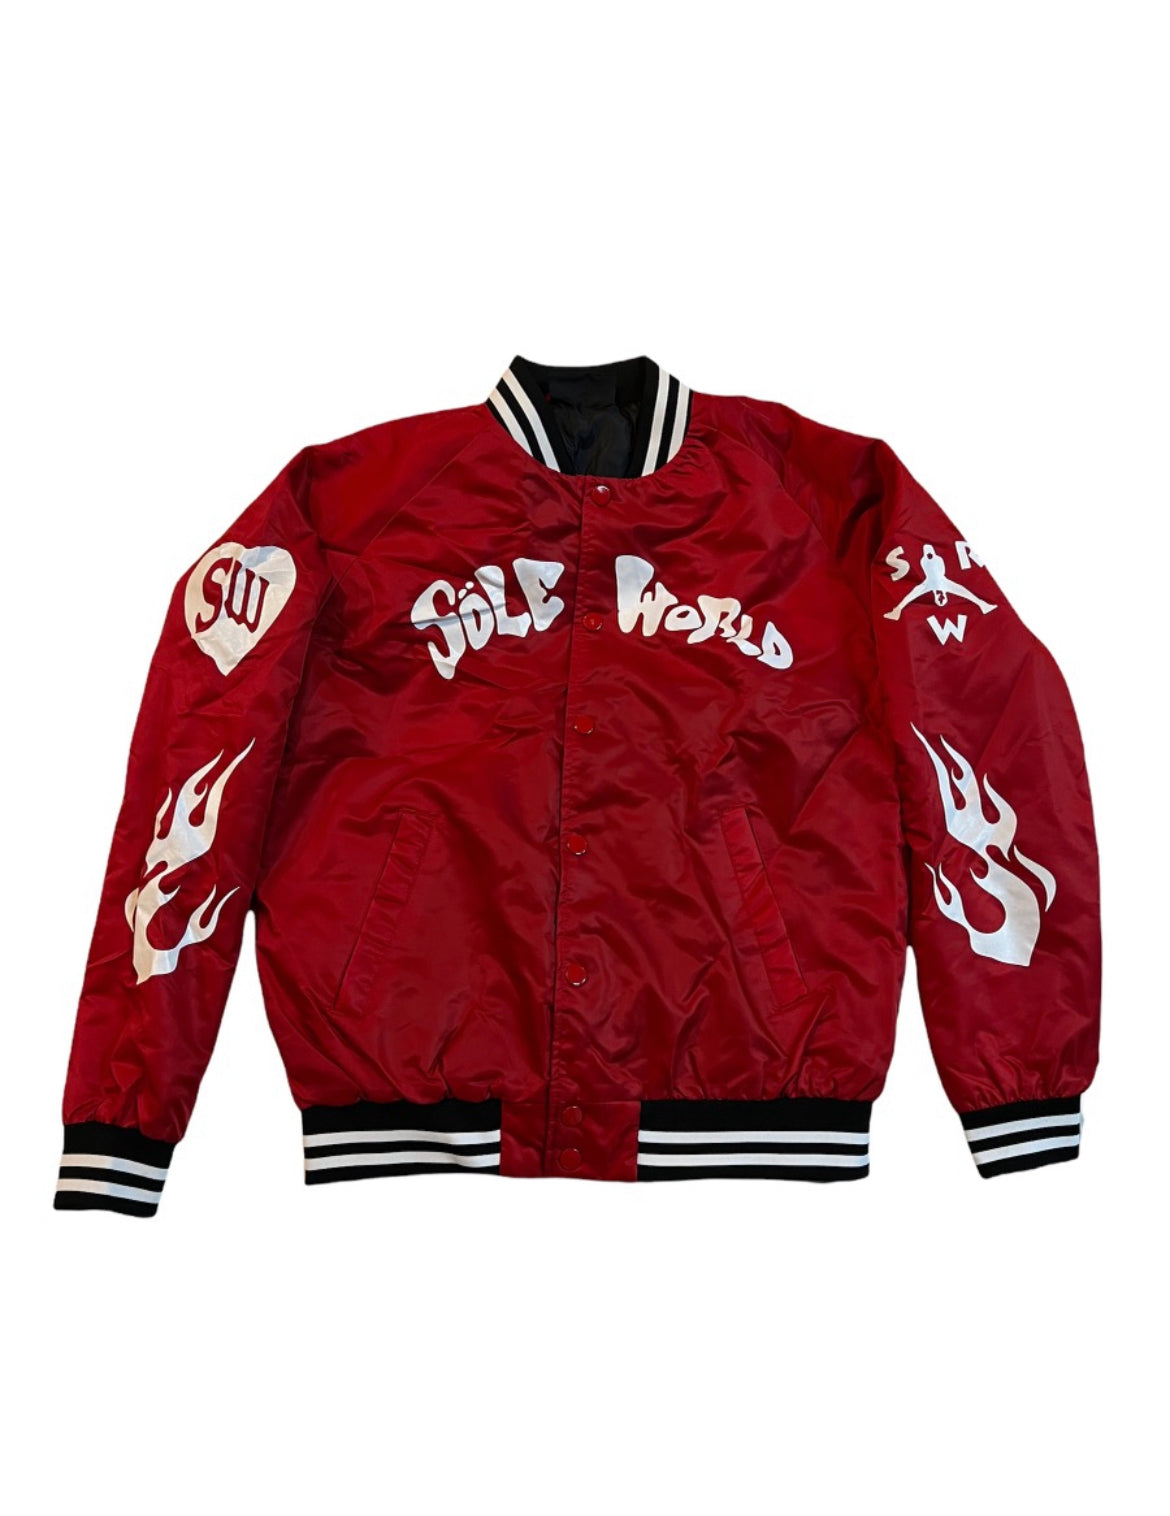 Sole World Bomber Red